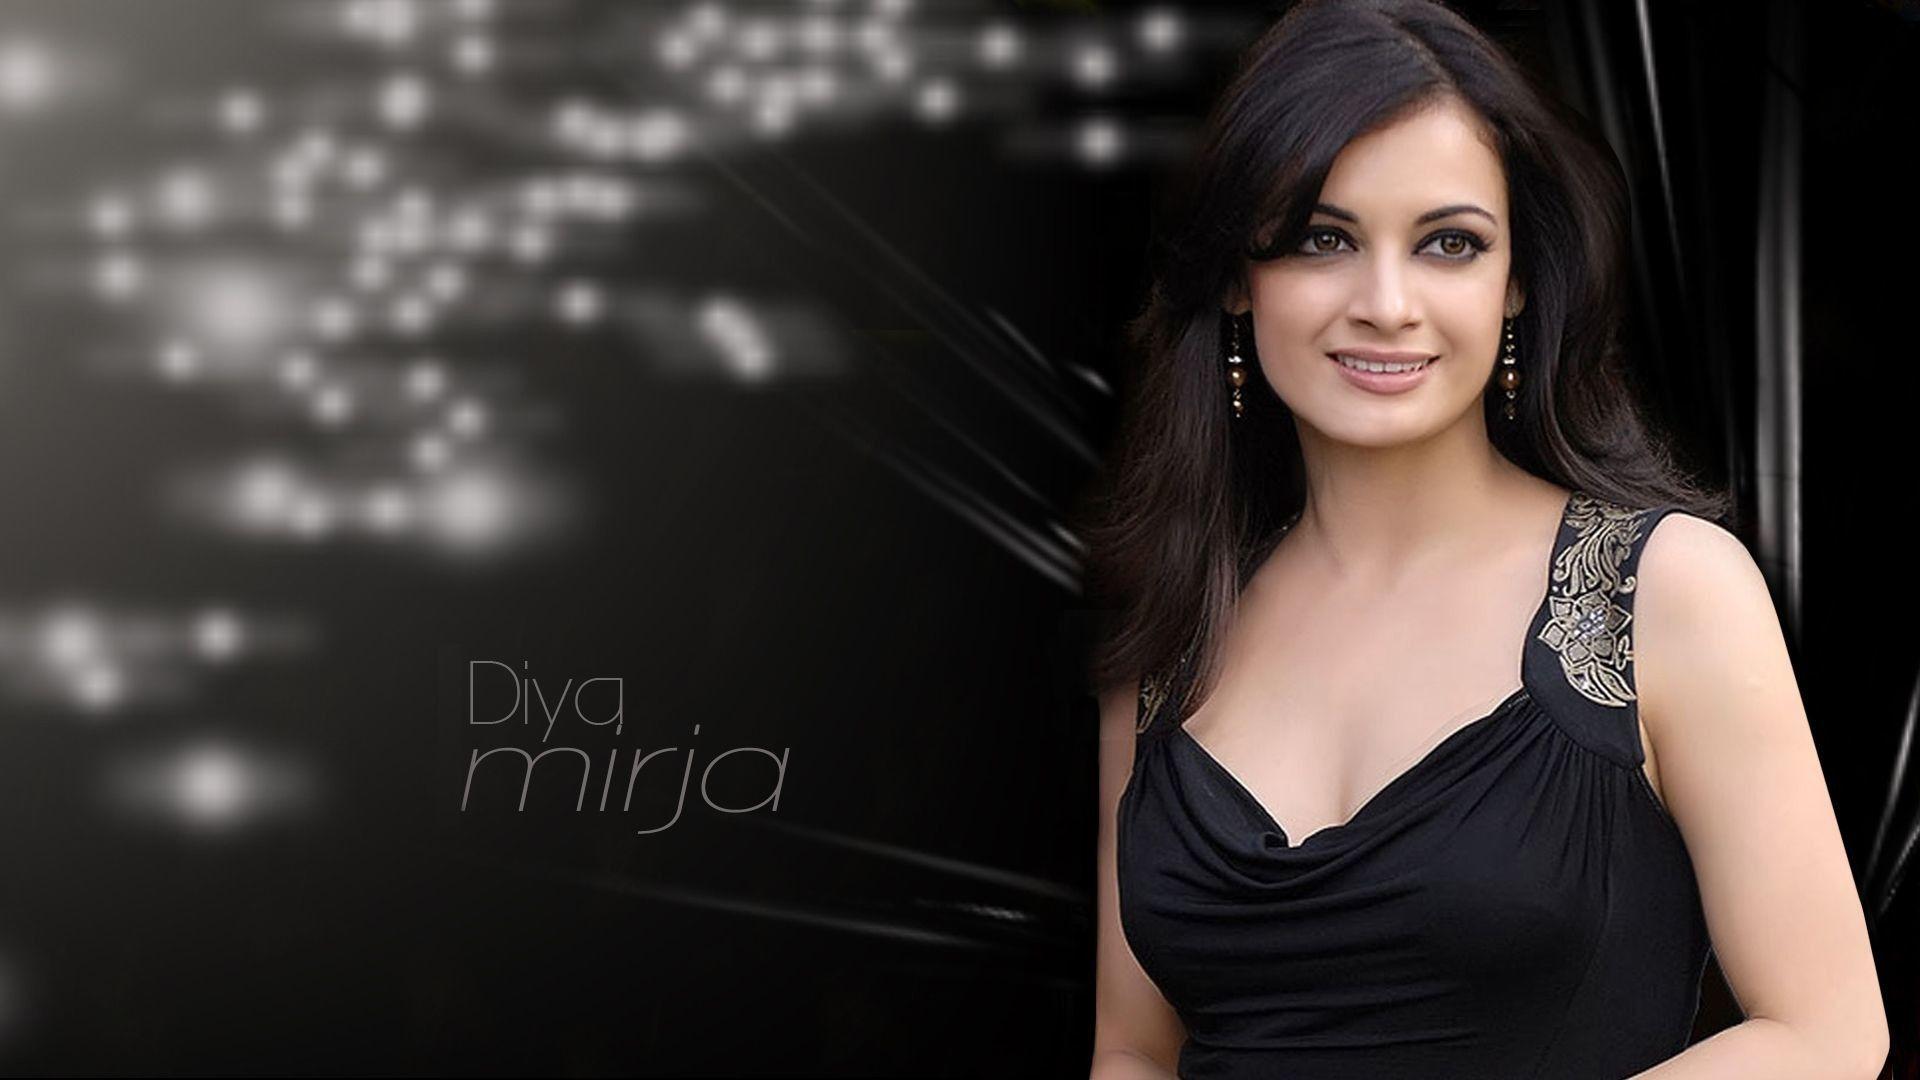 Bollywood Actress HD Wallpapers 1080p Free Download - Wallpaper Cave